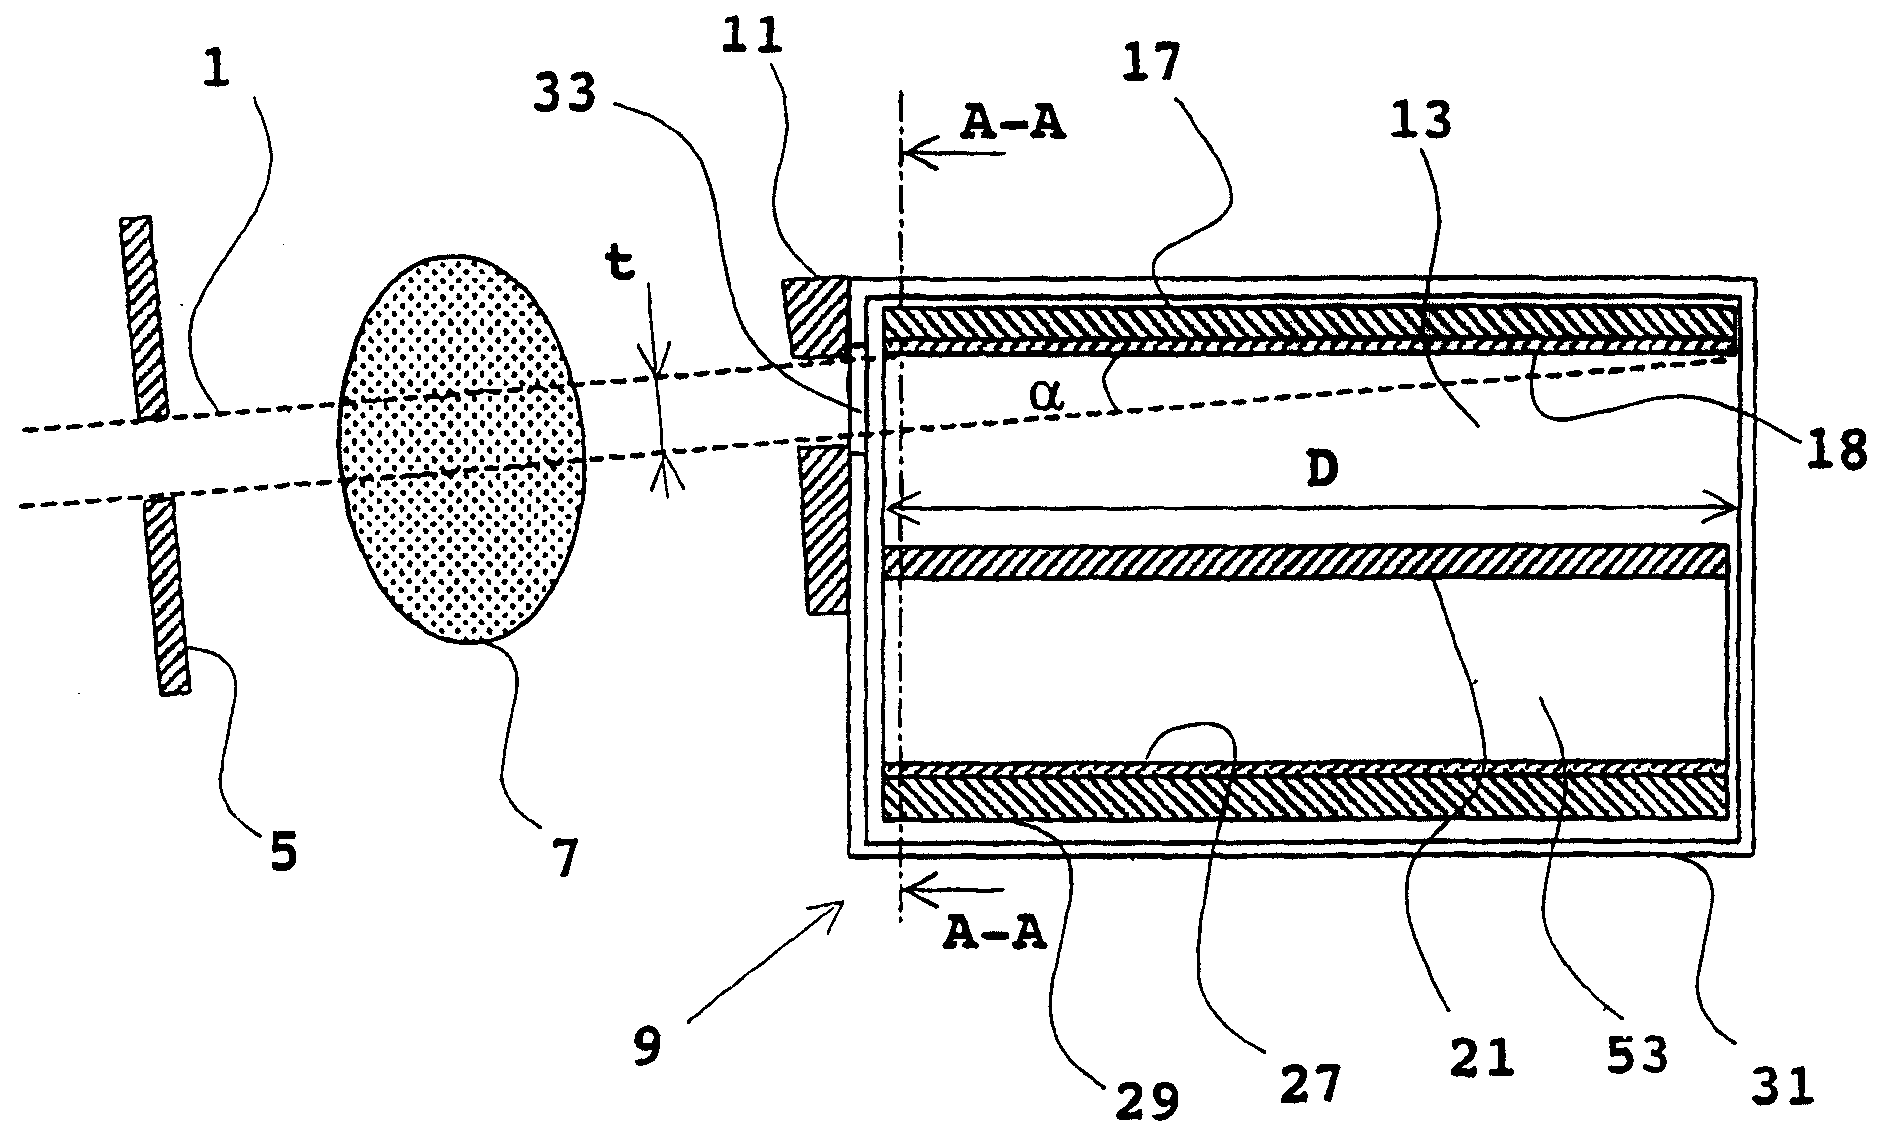 Apparatus and method for radiation detection